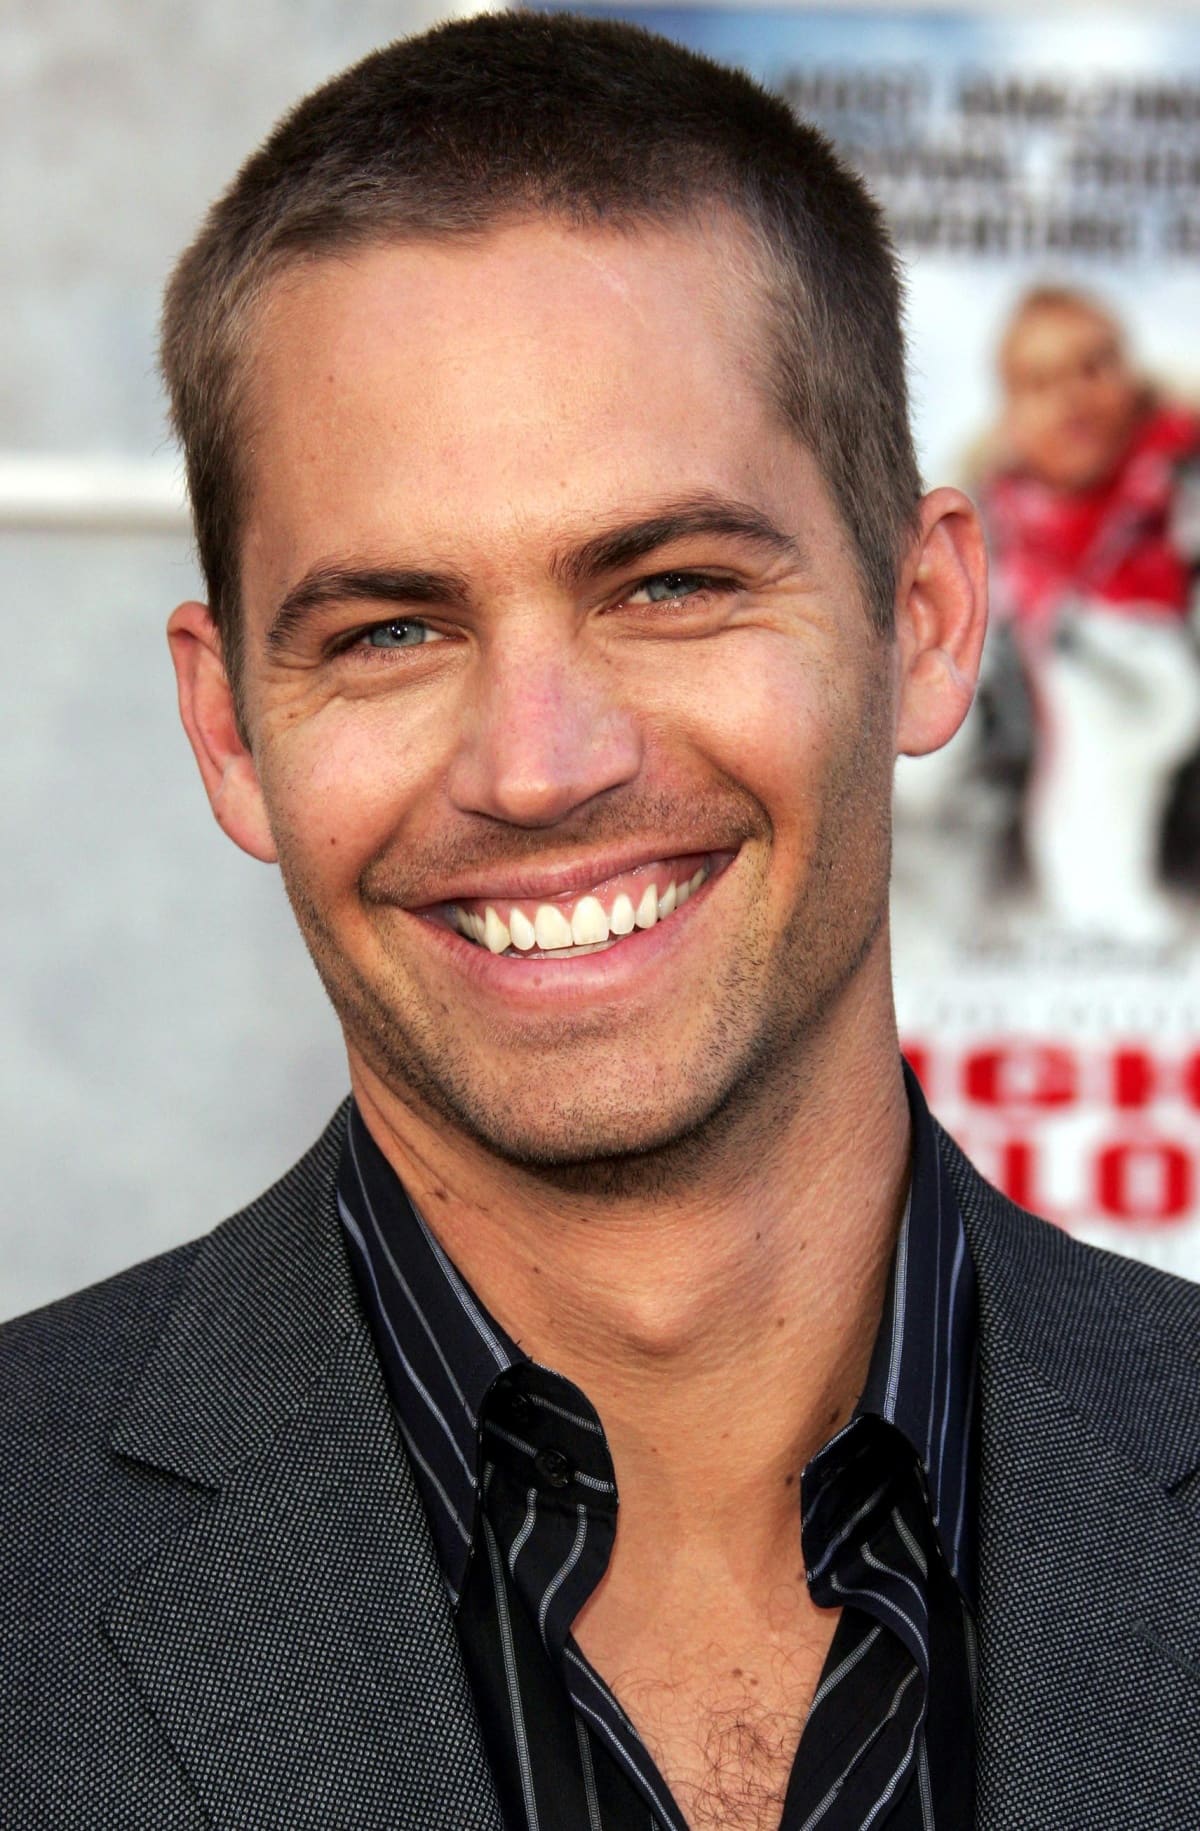 Paul Walker, a remarkable talent in the entertainment industry, left an enduring legacy despite the tragic car accident that claimed his life in 2013